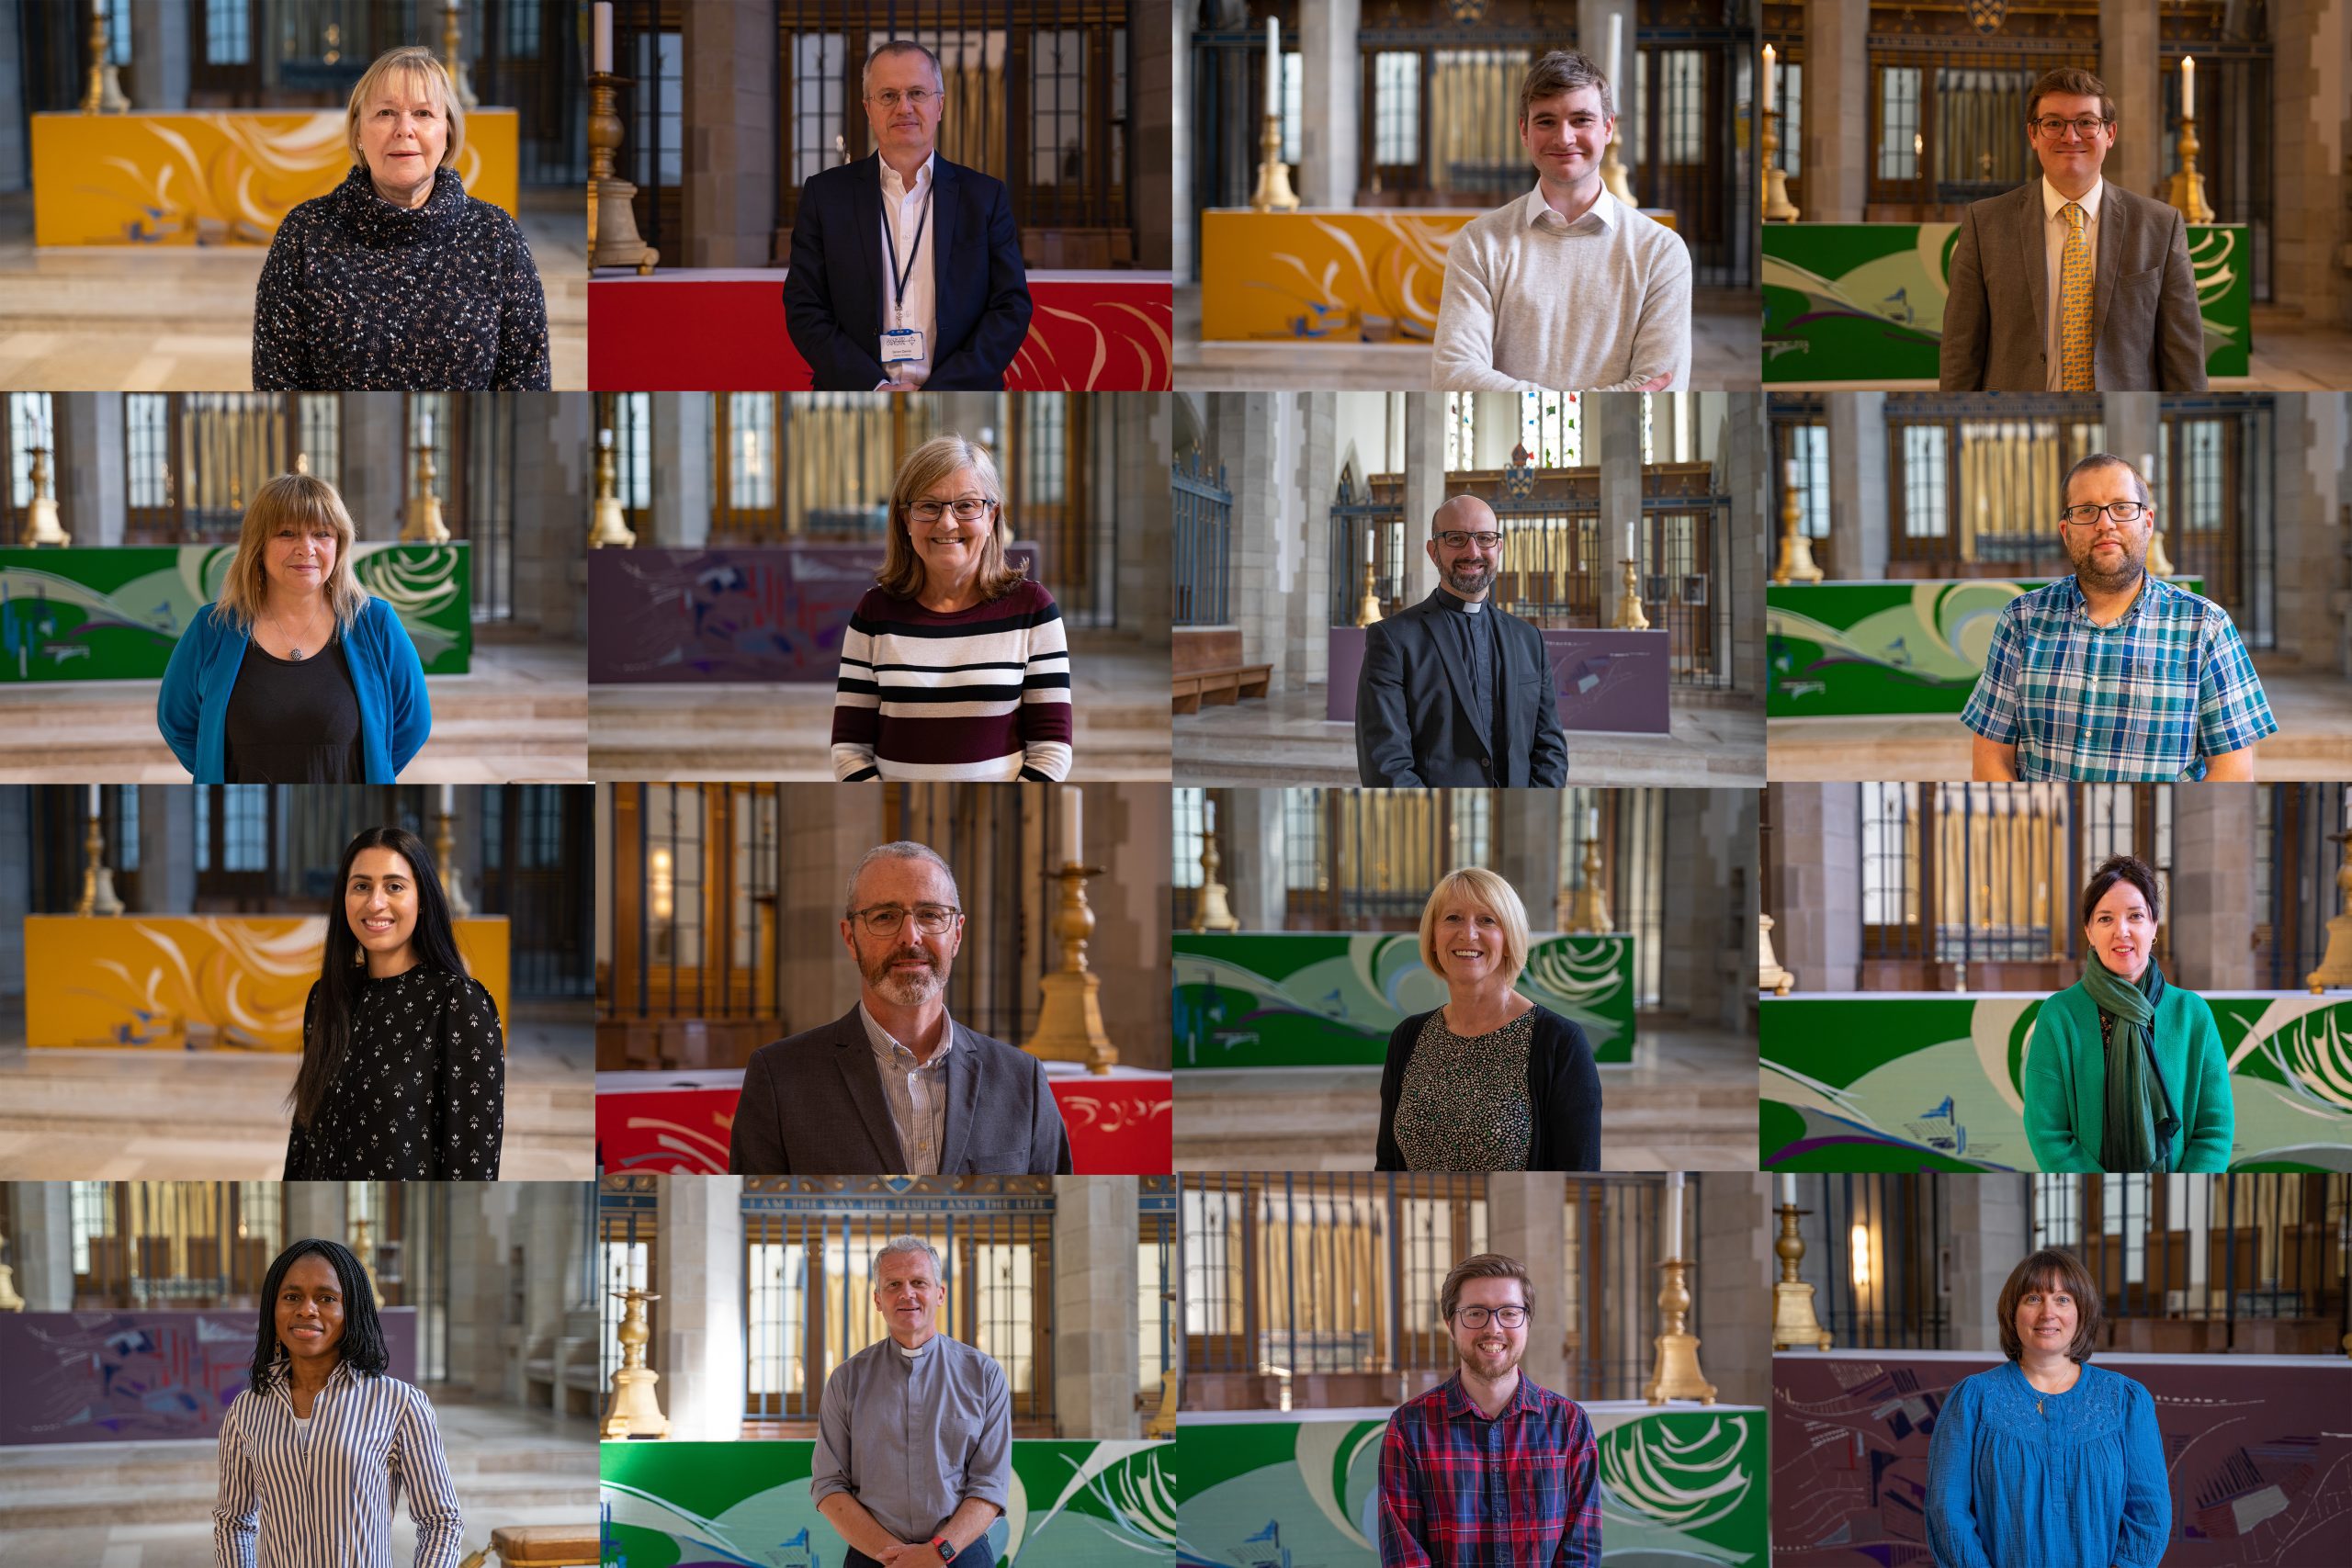 Cathedral Staff Collage